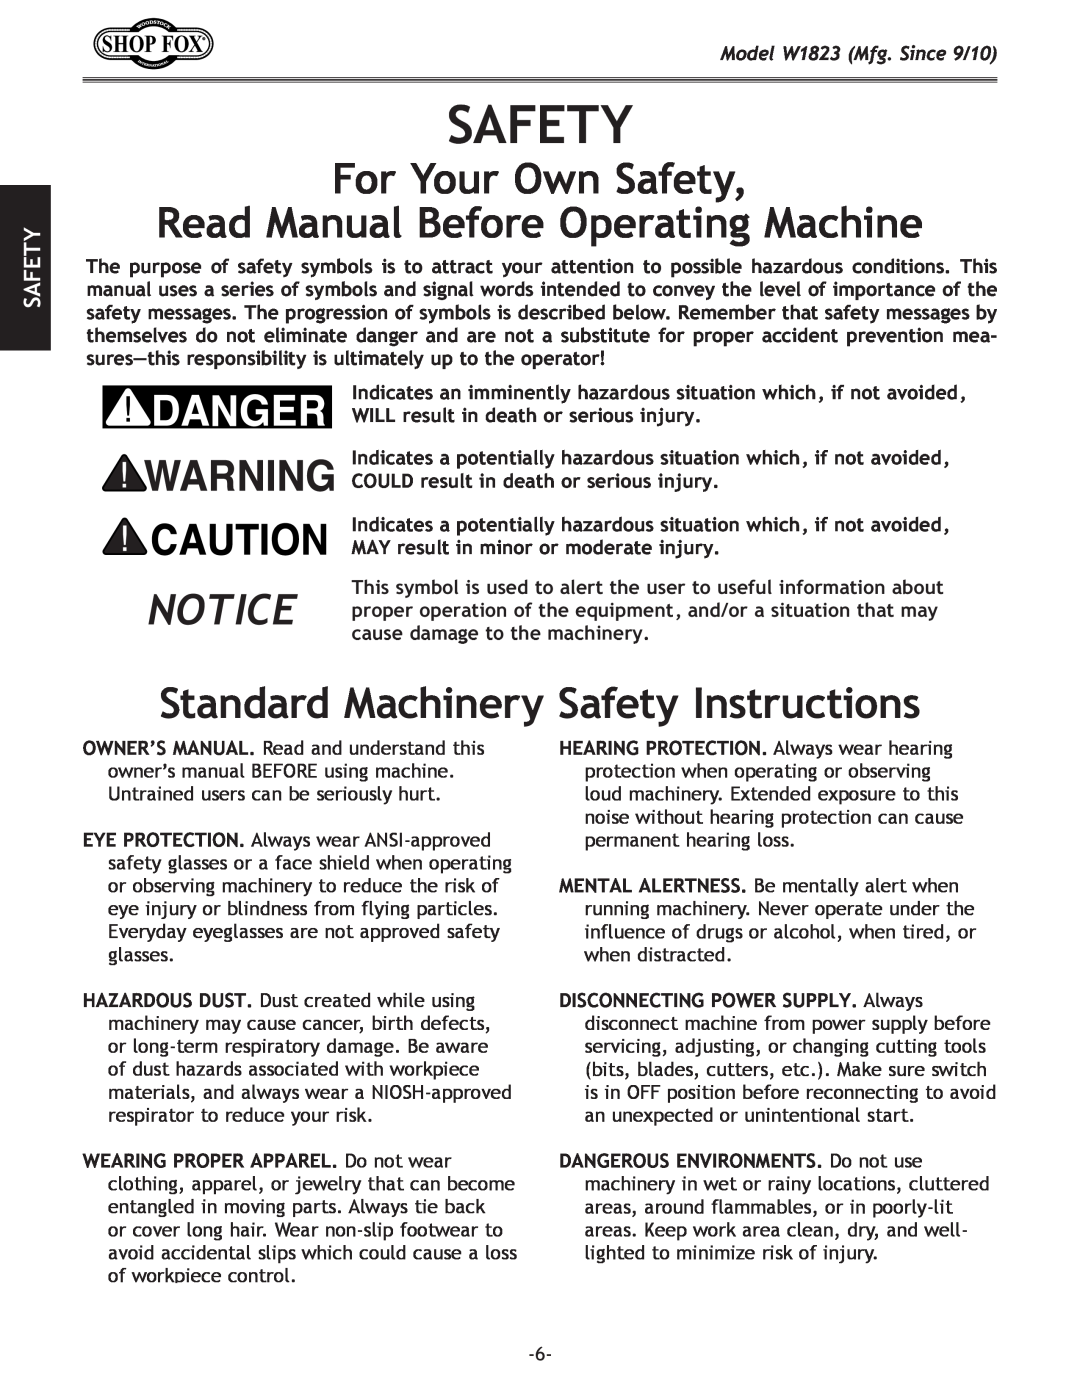 Woodstock manual SAFETYJ8= KP, For Your Own Safety, Read Manual Before Operating Machine, Model W1823 Mfg. Since 9/10 